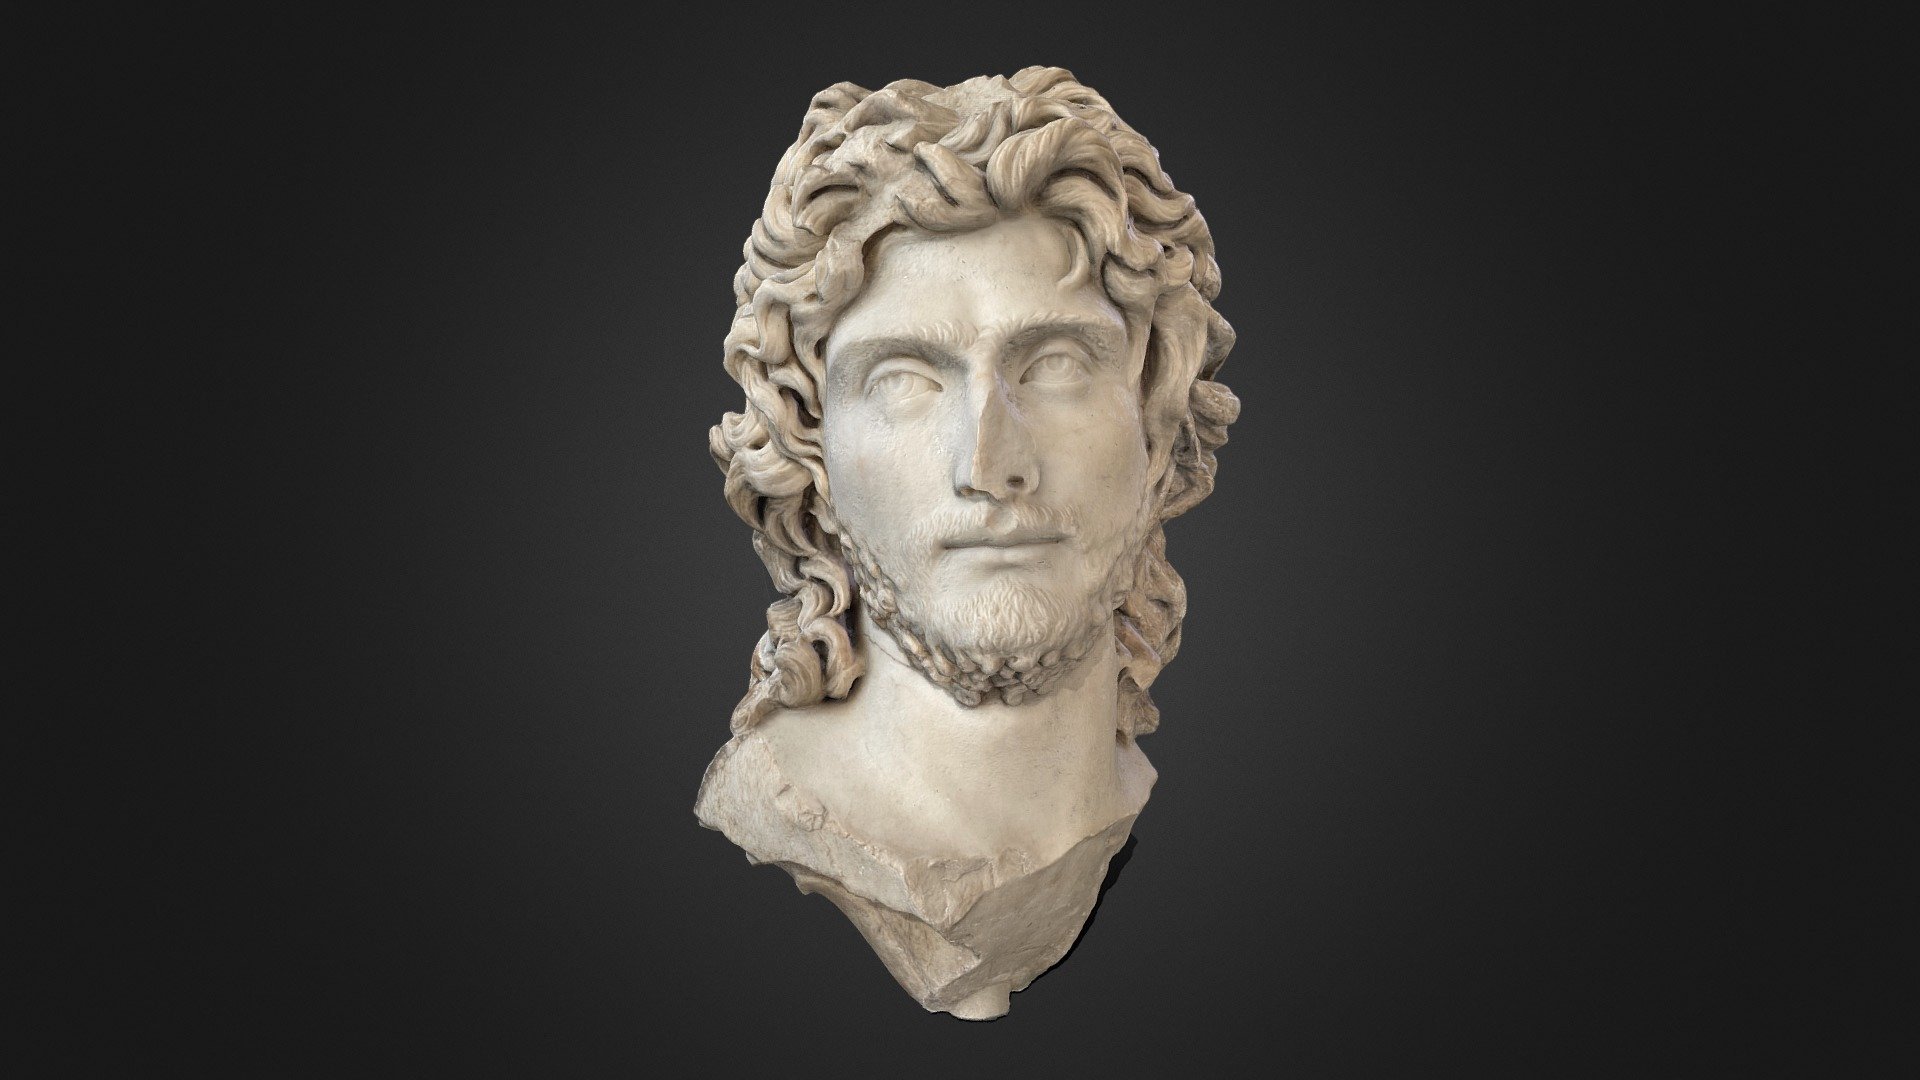 Inventory number: EAΜ 419

Roman Period

2nd cent. AD

It was found in the Theatre of Dionysos in 1870 or 1876. At the back, the biggest part of his hair has been restored.

It depicts a young man with idealised features, rich and unruly hair which fall on the shoulders, and a short beard. His head emerges out of a flower's calyx as the two acanthus leaves still preserved on his nape show. The flower as a symbol of eternity and rebirth indicates that the man had died by the time that his portrait was made.

Who the depicted person is remains unknown. Perhaps he was a philhellene ruler or the descendant of a royal family who had more of a spiritual than political connection to Athens. Some researchers identify him with Sauromates II, king of the Cimmerian Bosporus, others with Rhoemetalkes whereas there are scholars who think it is Herodes Atticus or the emperor Gallienus.

Information from: https://www.theacropolismuseum.gr/en/bust-ruler

3D model: Aleix Barberà Giné from 64 photos with an iphone 12 pro - Bust of a ruler, Acropolis Museum - 3D model by Resguard 3d model